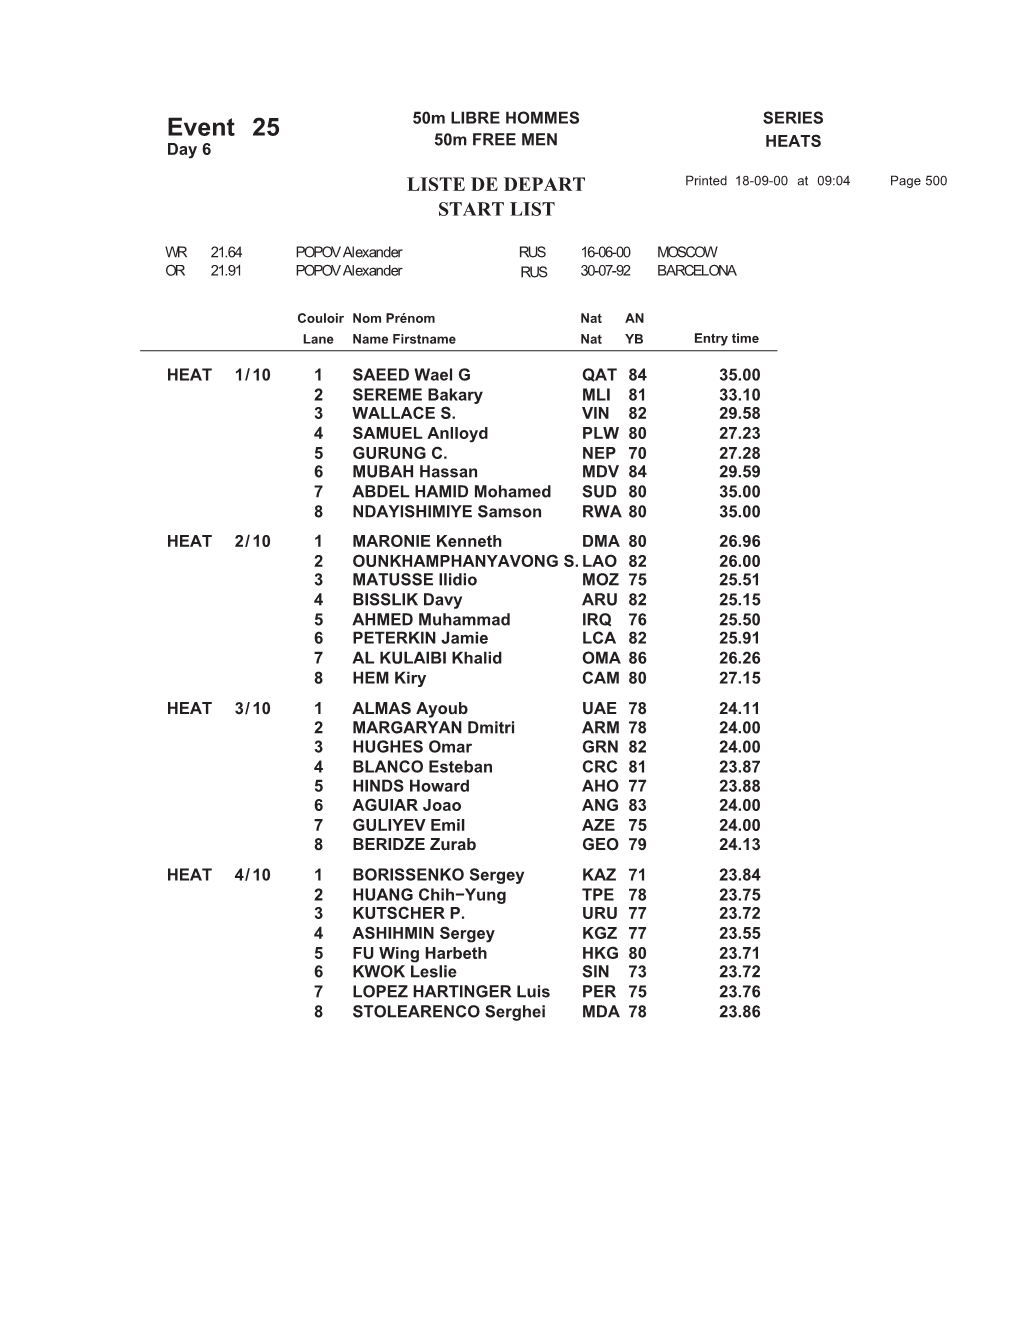 2000 Olympic Games Results